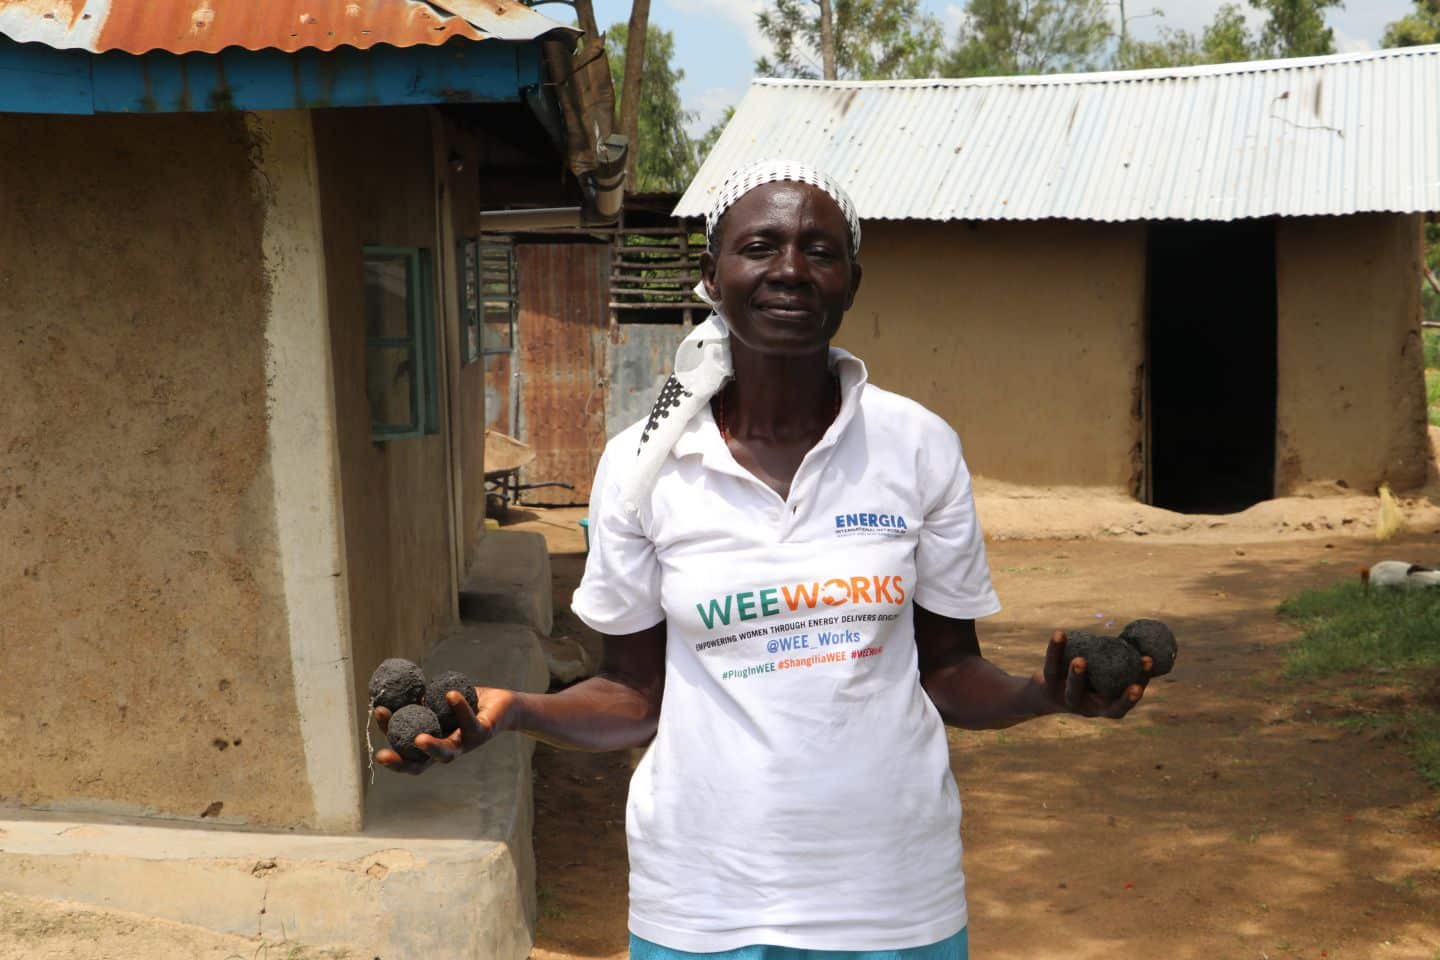 Millicent Akinyi Dula: “I want to be the first woman to set-up a briquette production centre in my village”